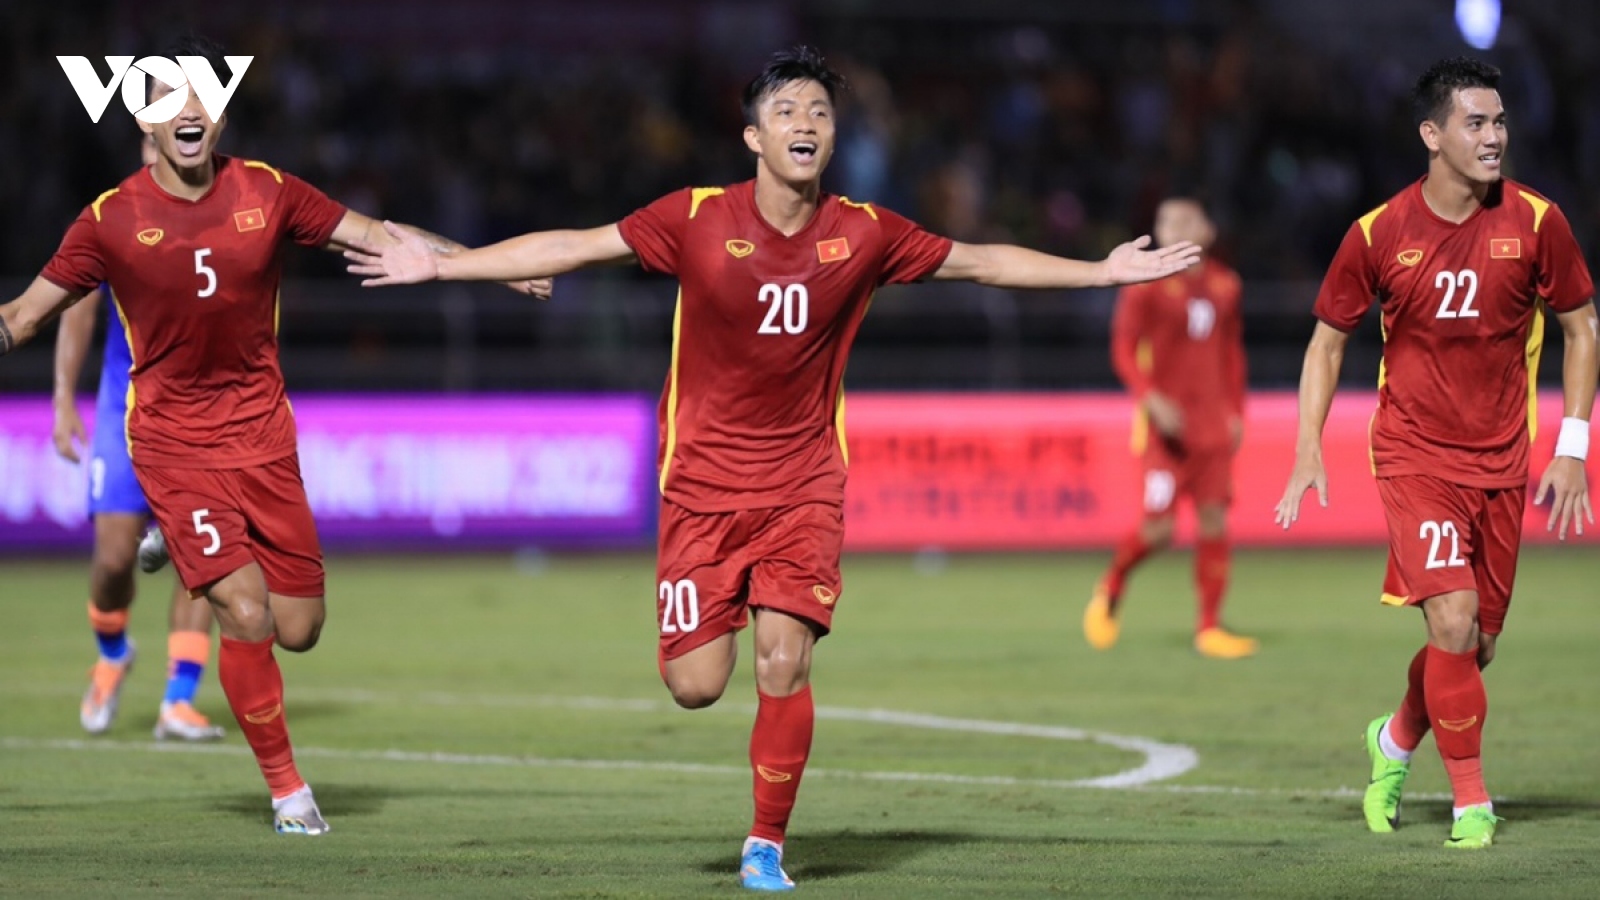 High hopes for Vietnamese sports at international tournaments in 2023